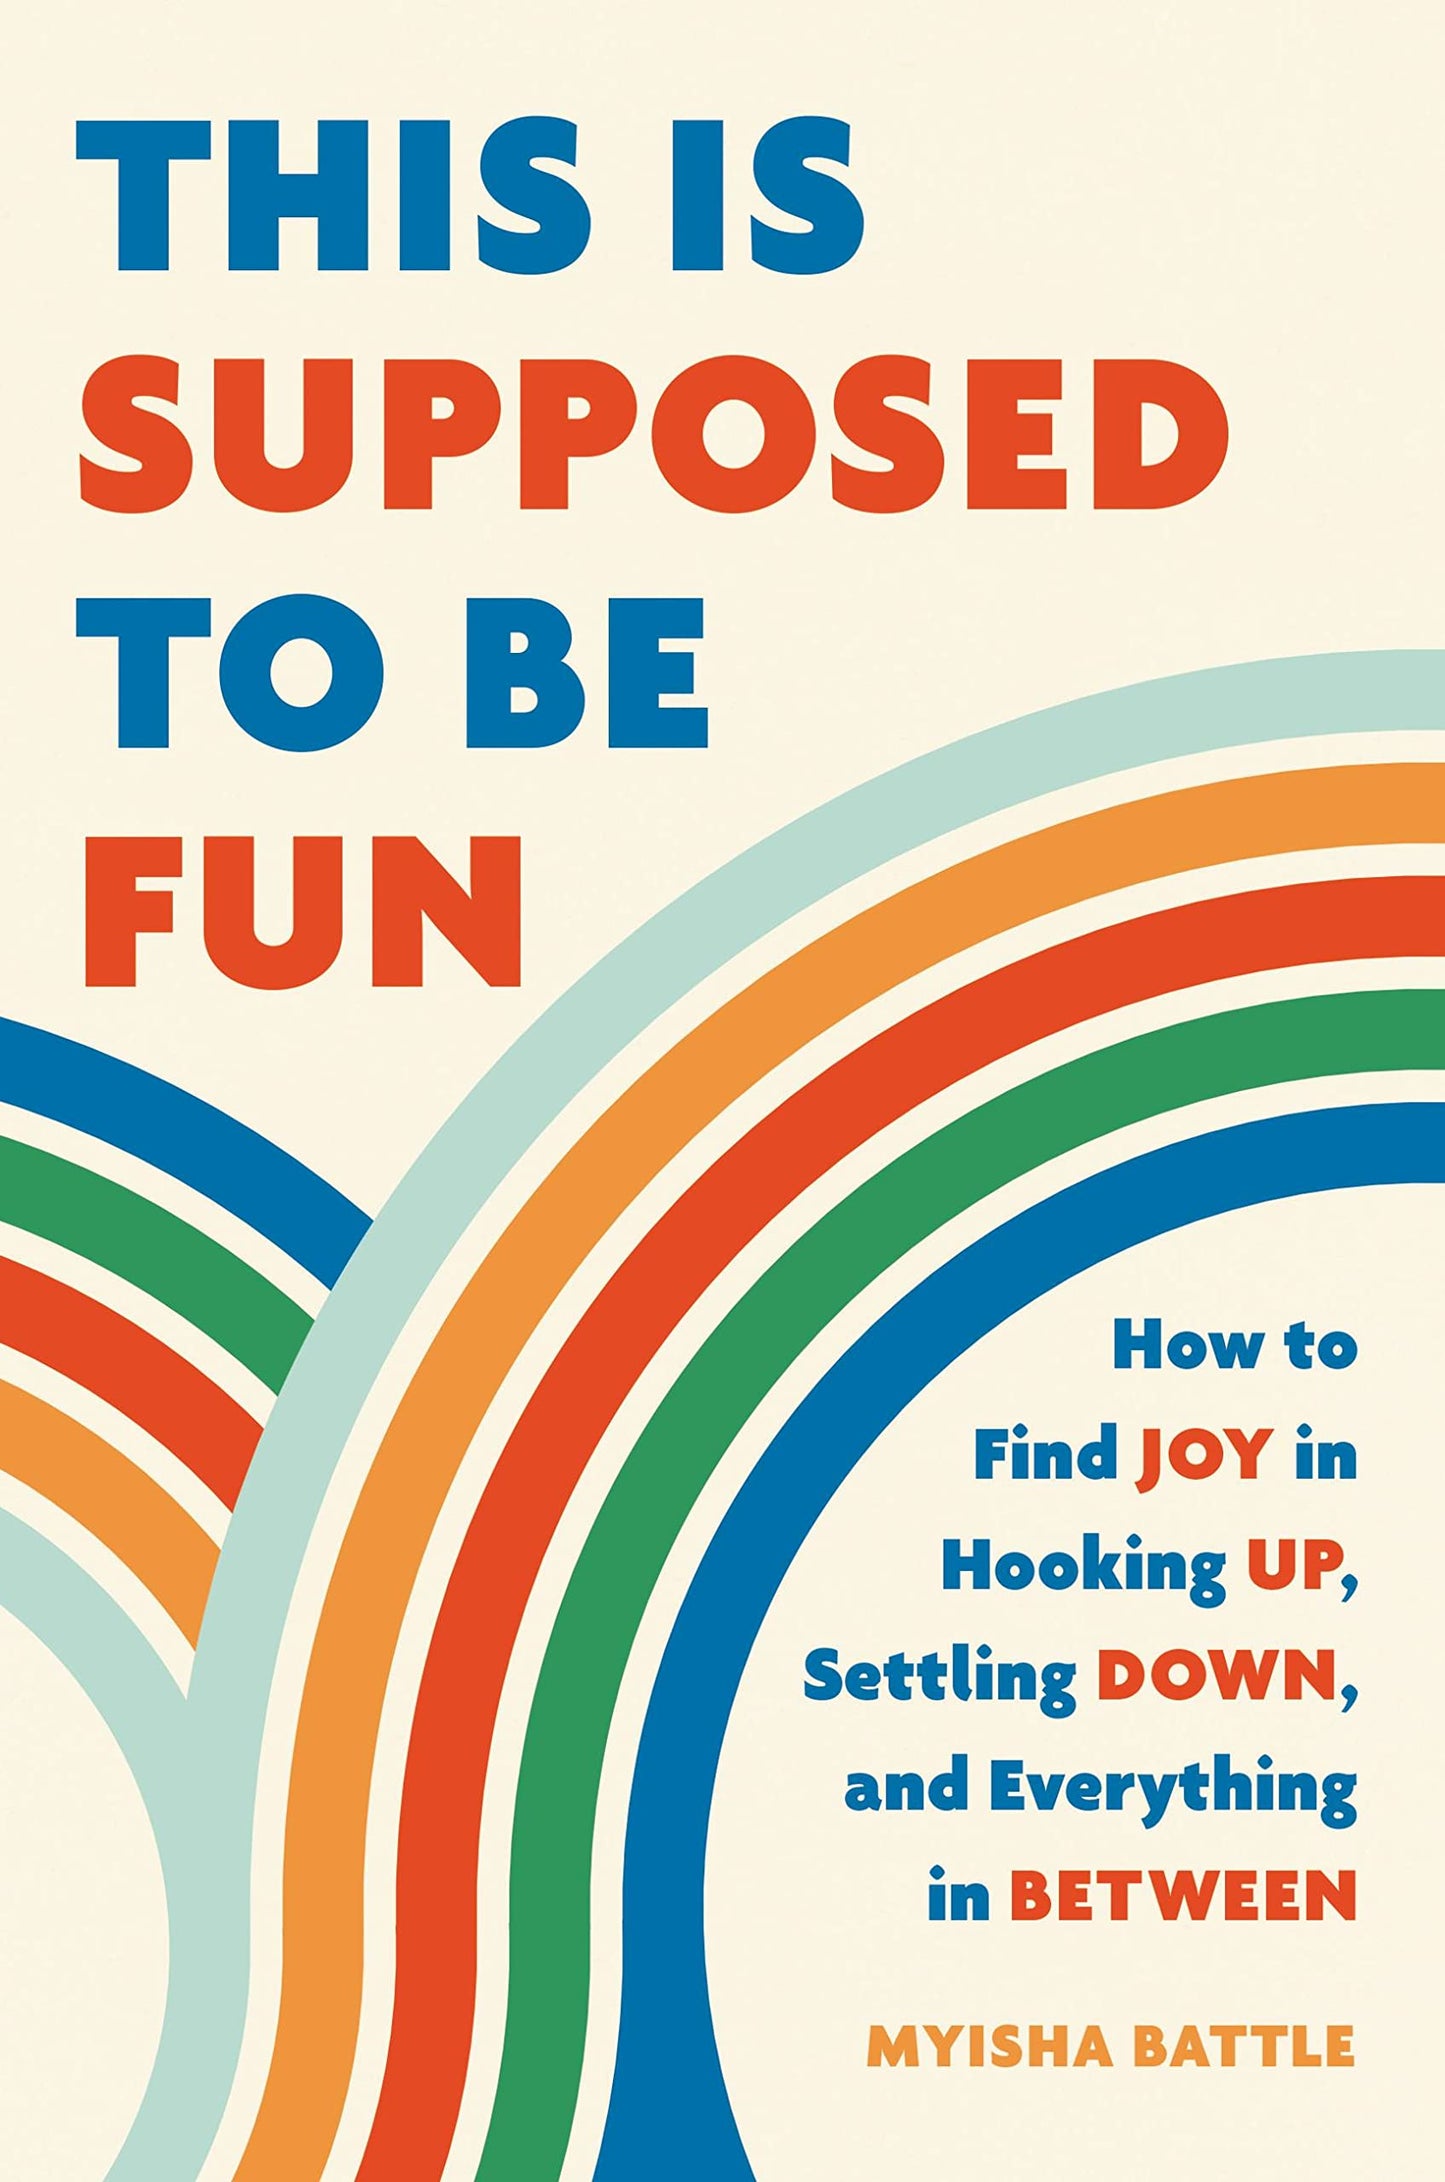 This Is Supposed to Be Fun // How to Find Joy in Hooking Up, Settling Down, and Everything in Between